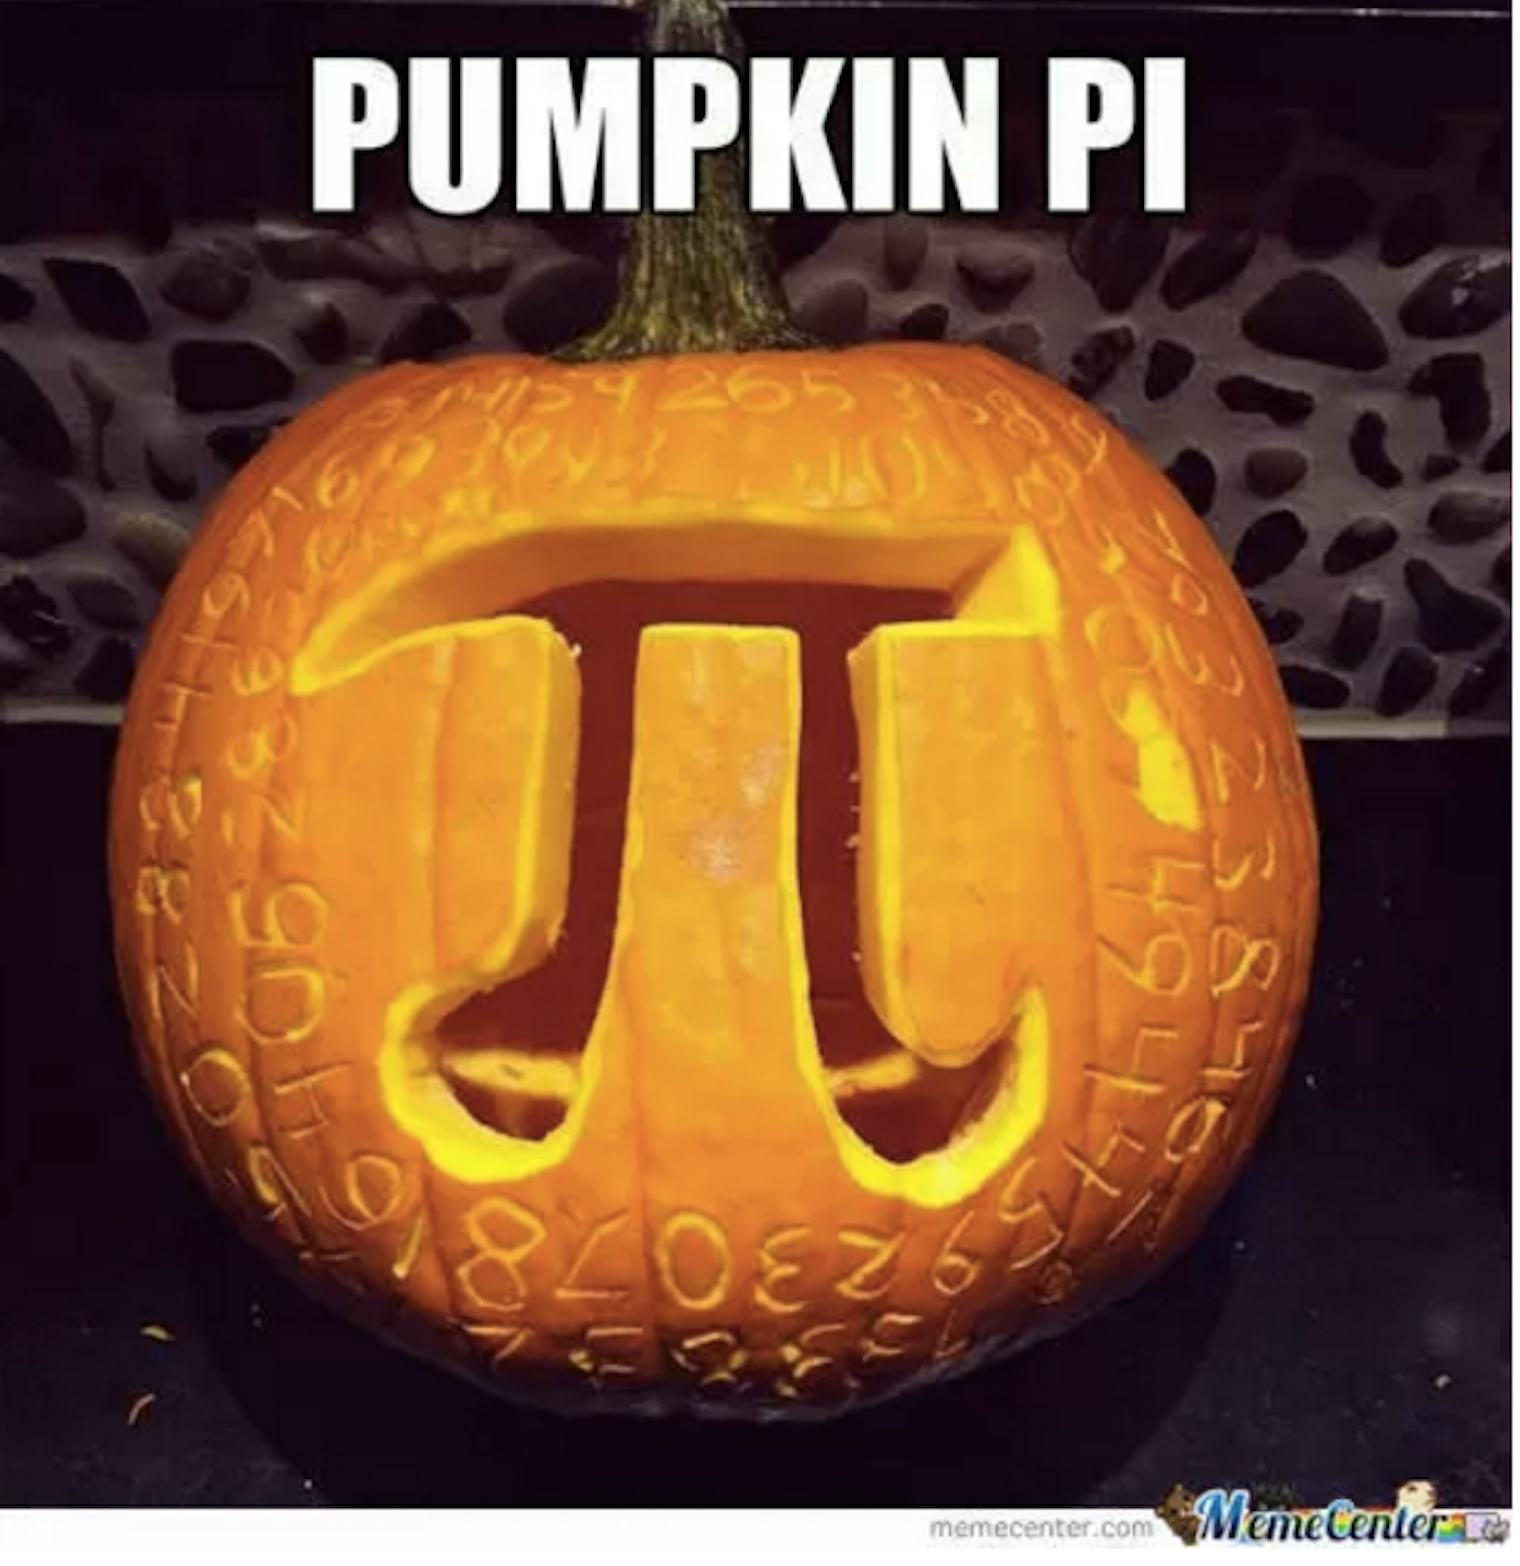 10 National Pi Day Memes And GIFs For Nerds And Foodies Alike